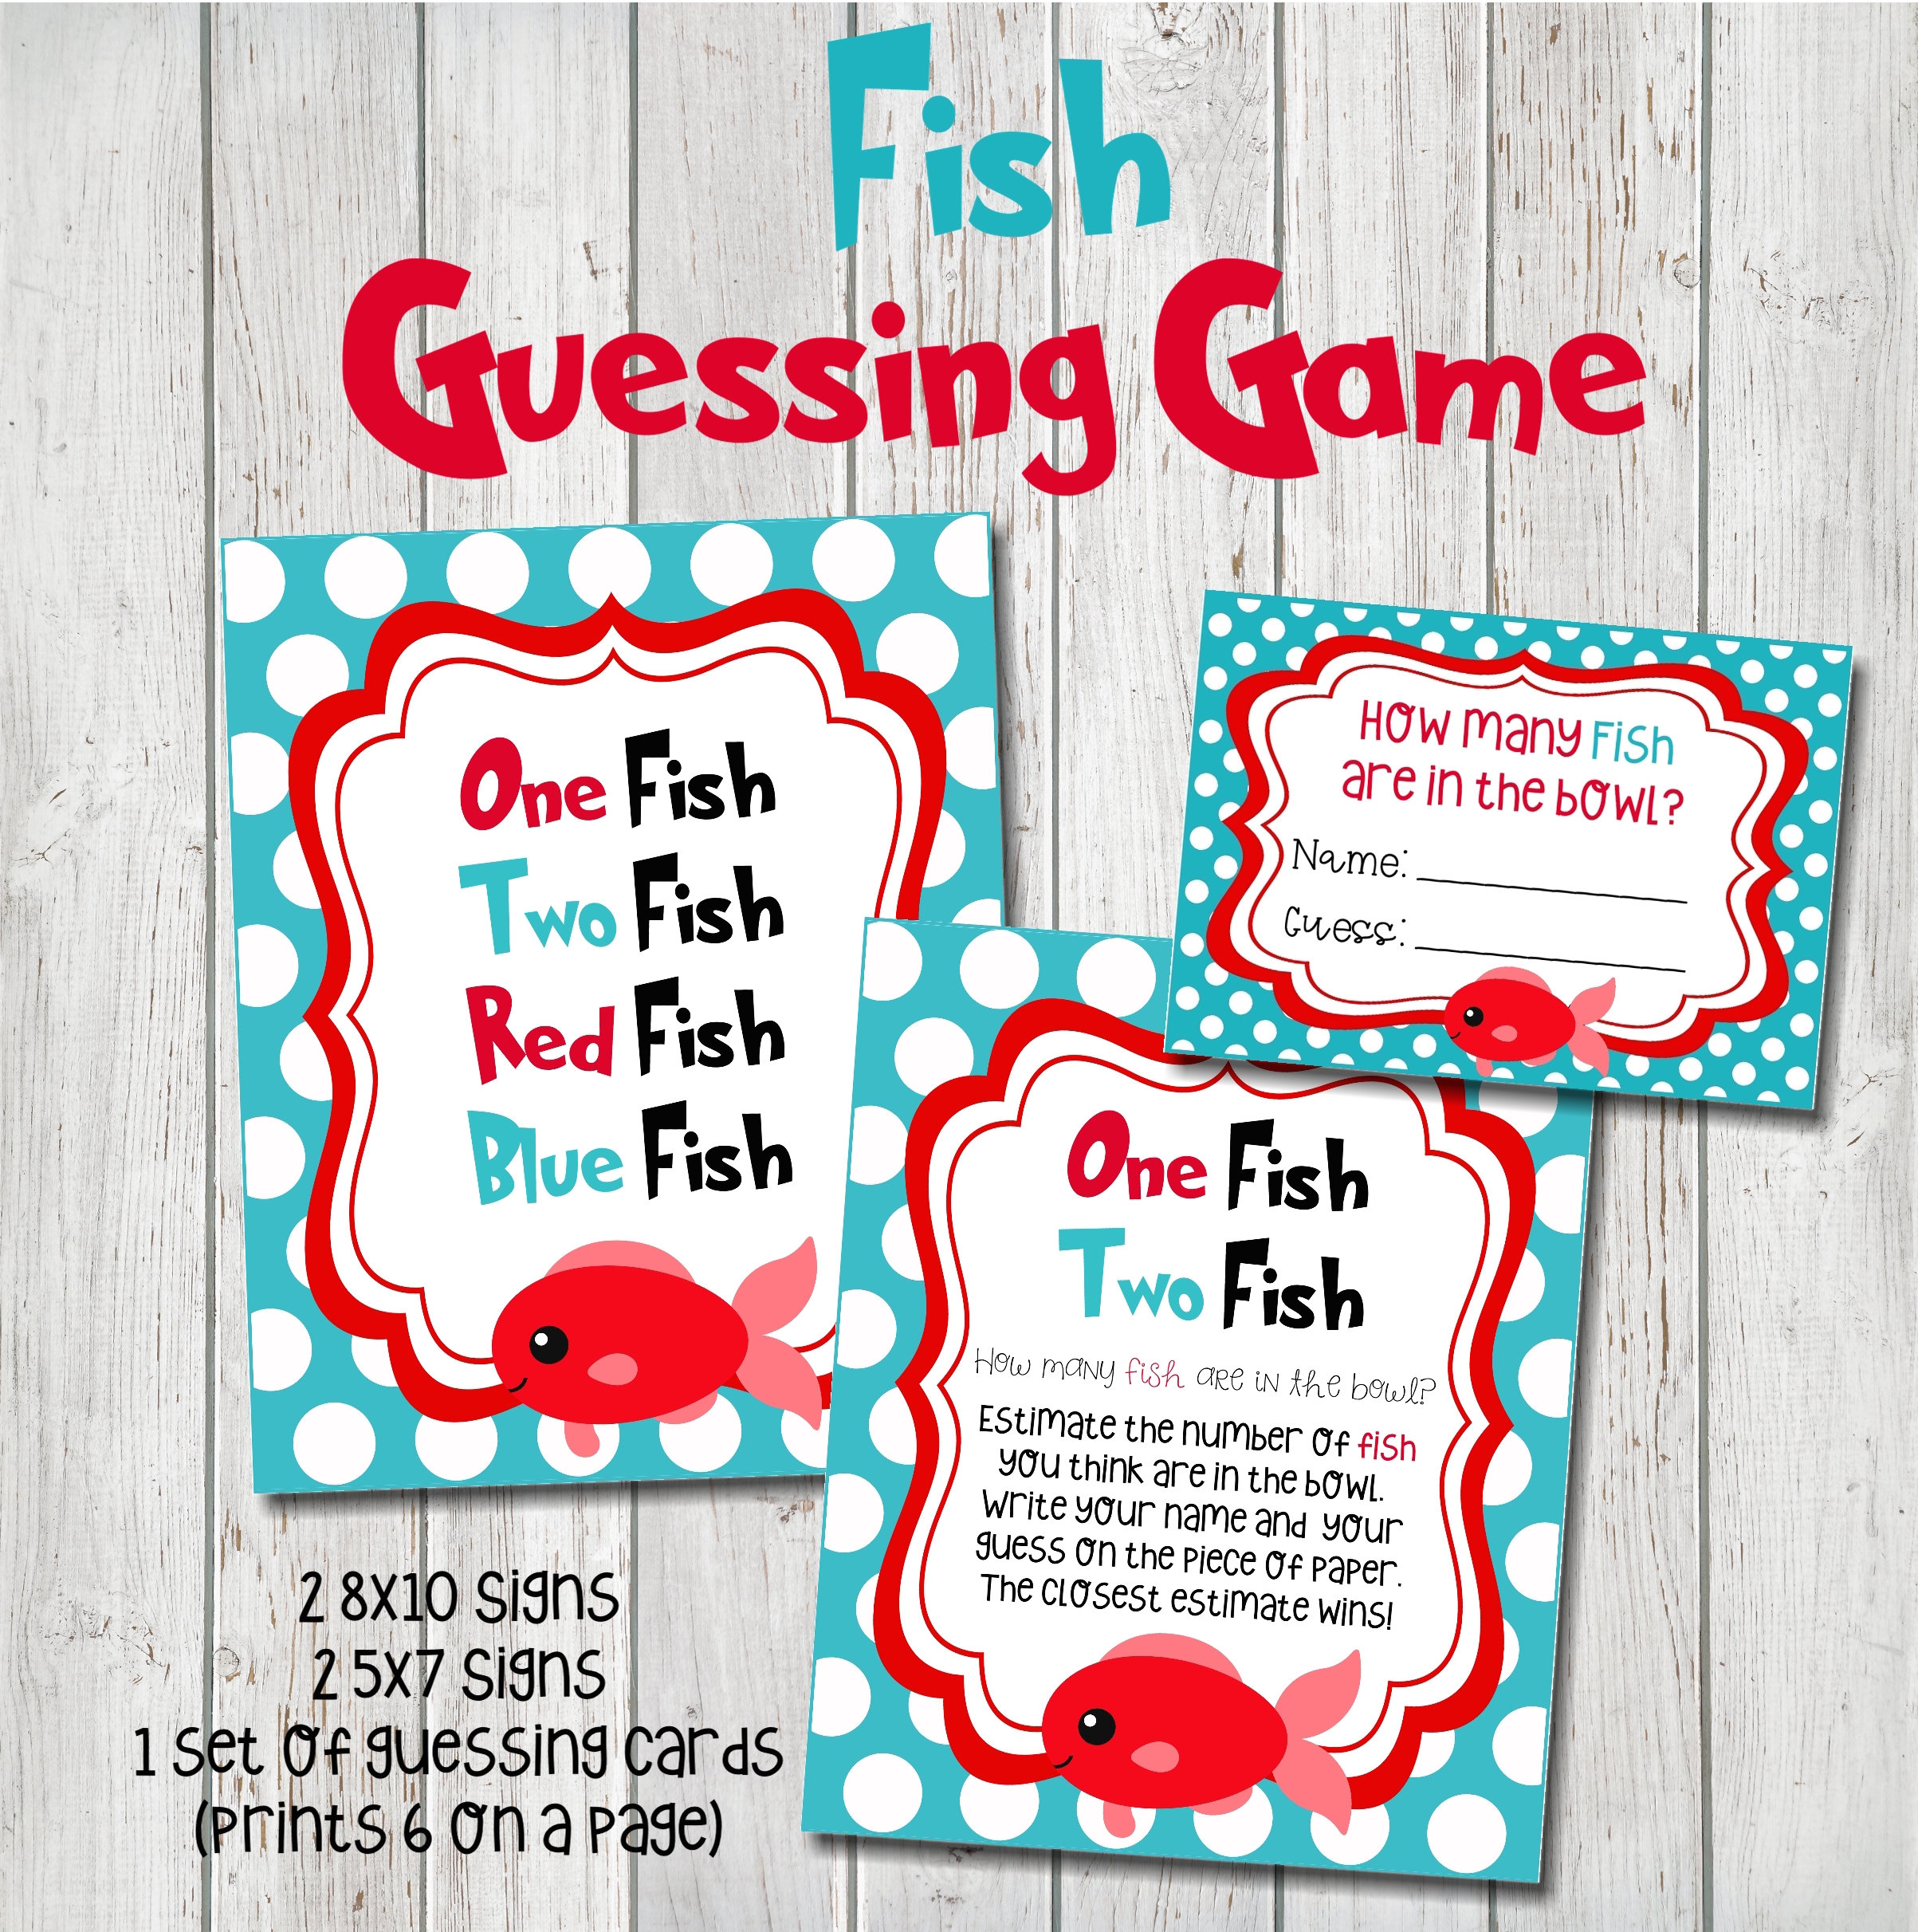 Fish Guessing How Many Game, One Fish Two Fish Guessing Game, Read